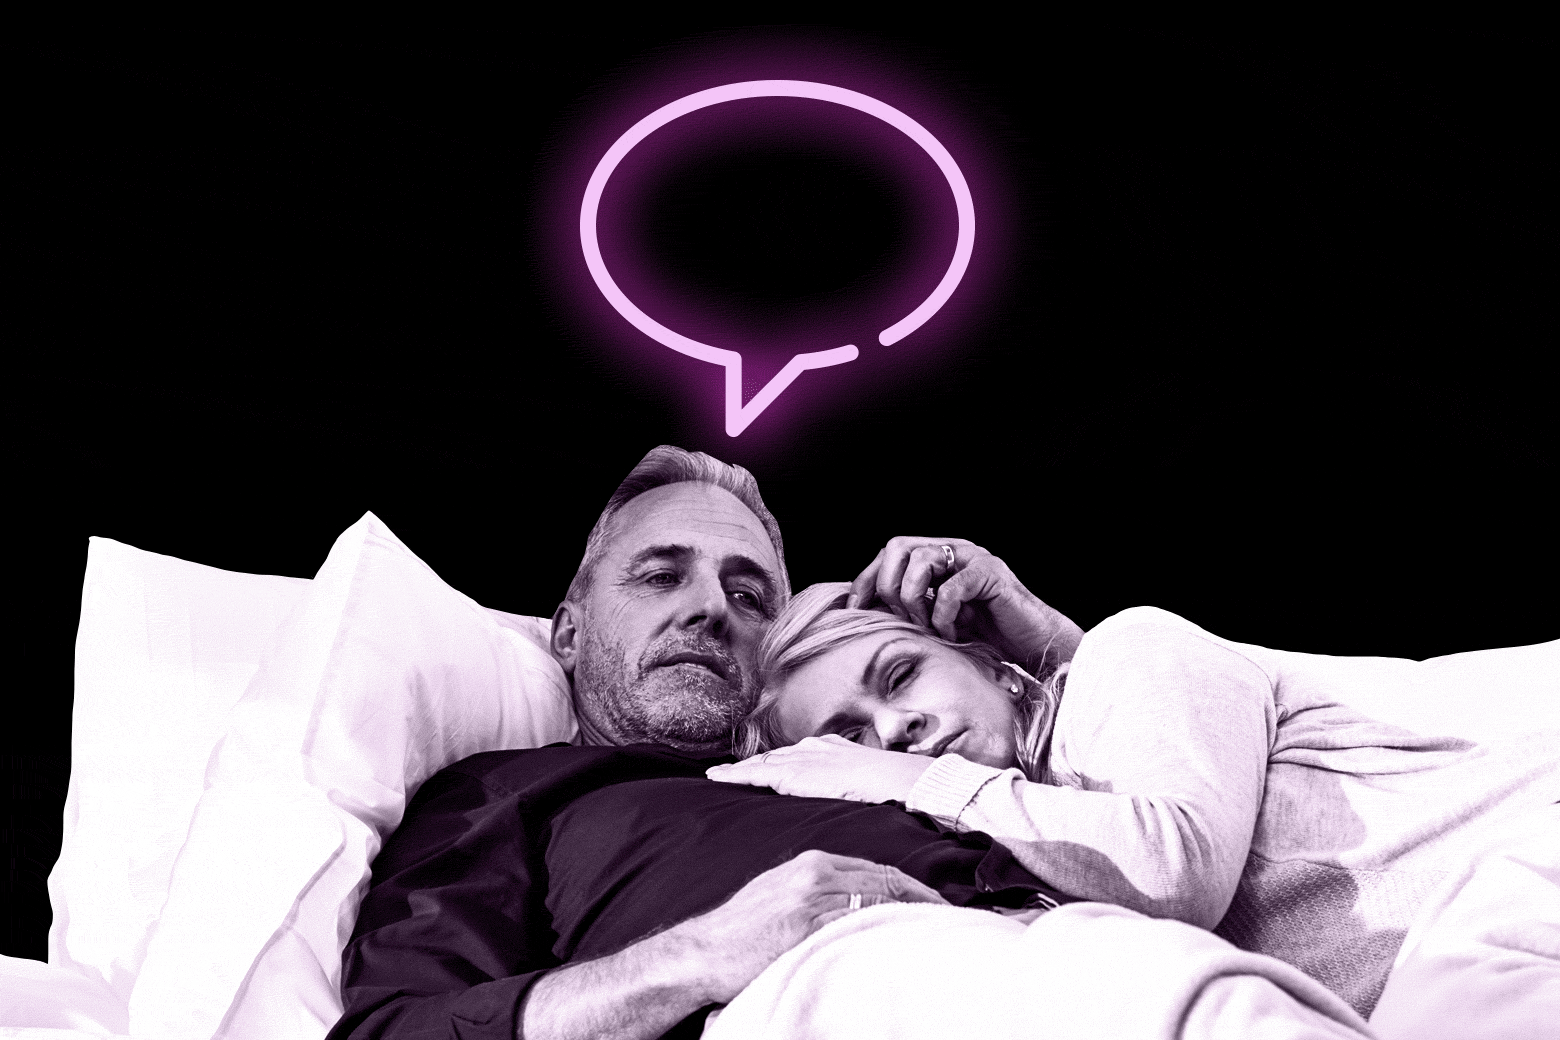 GIF: An older couple lies cuddled in bed, but the man is looking pensively into the distance. A neon speech bubble glows in the background.